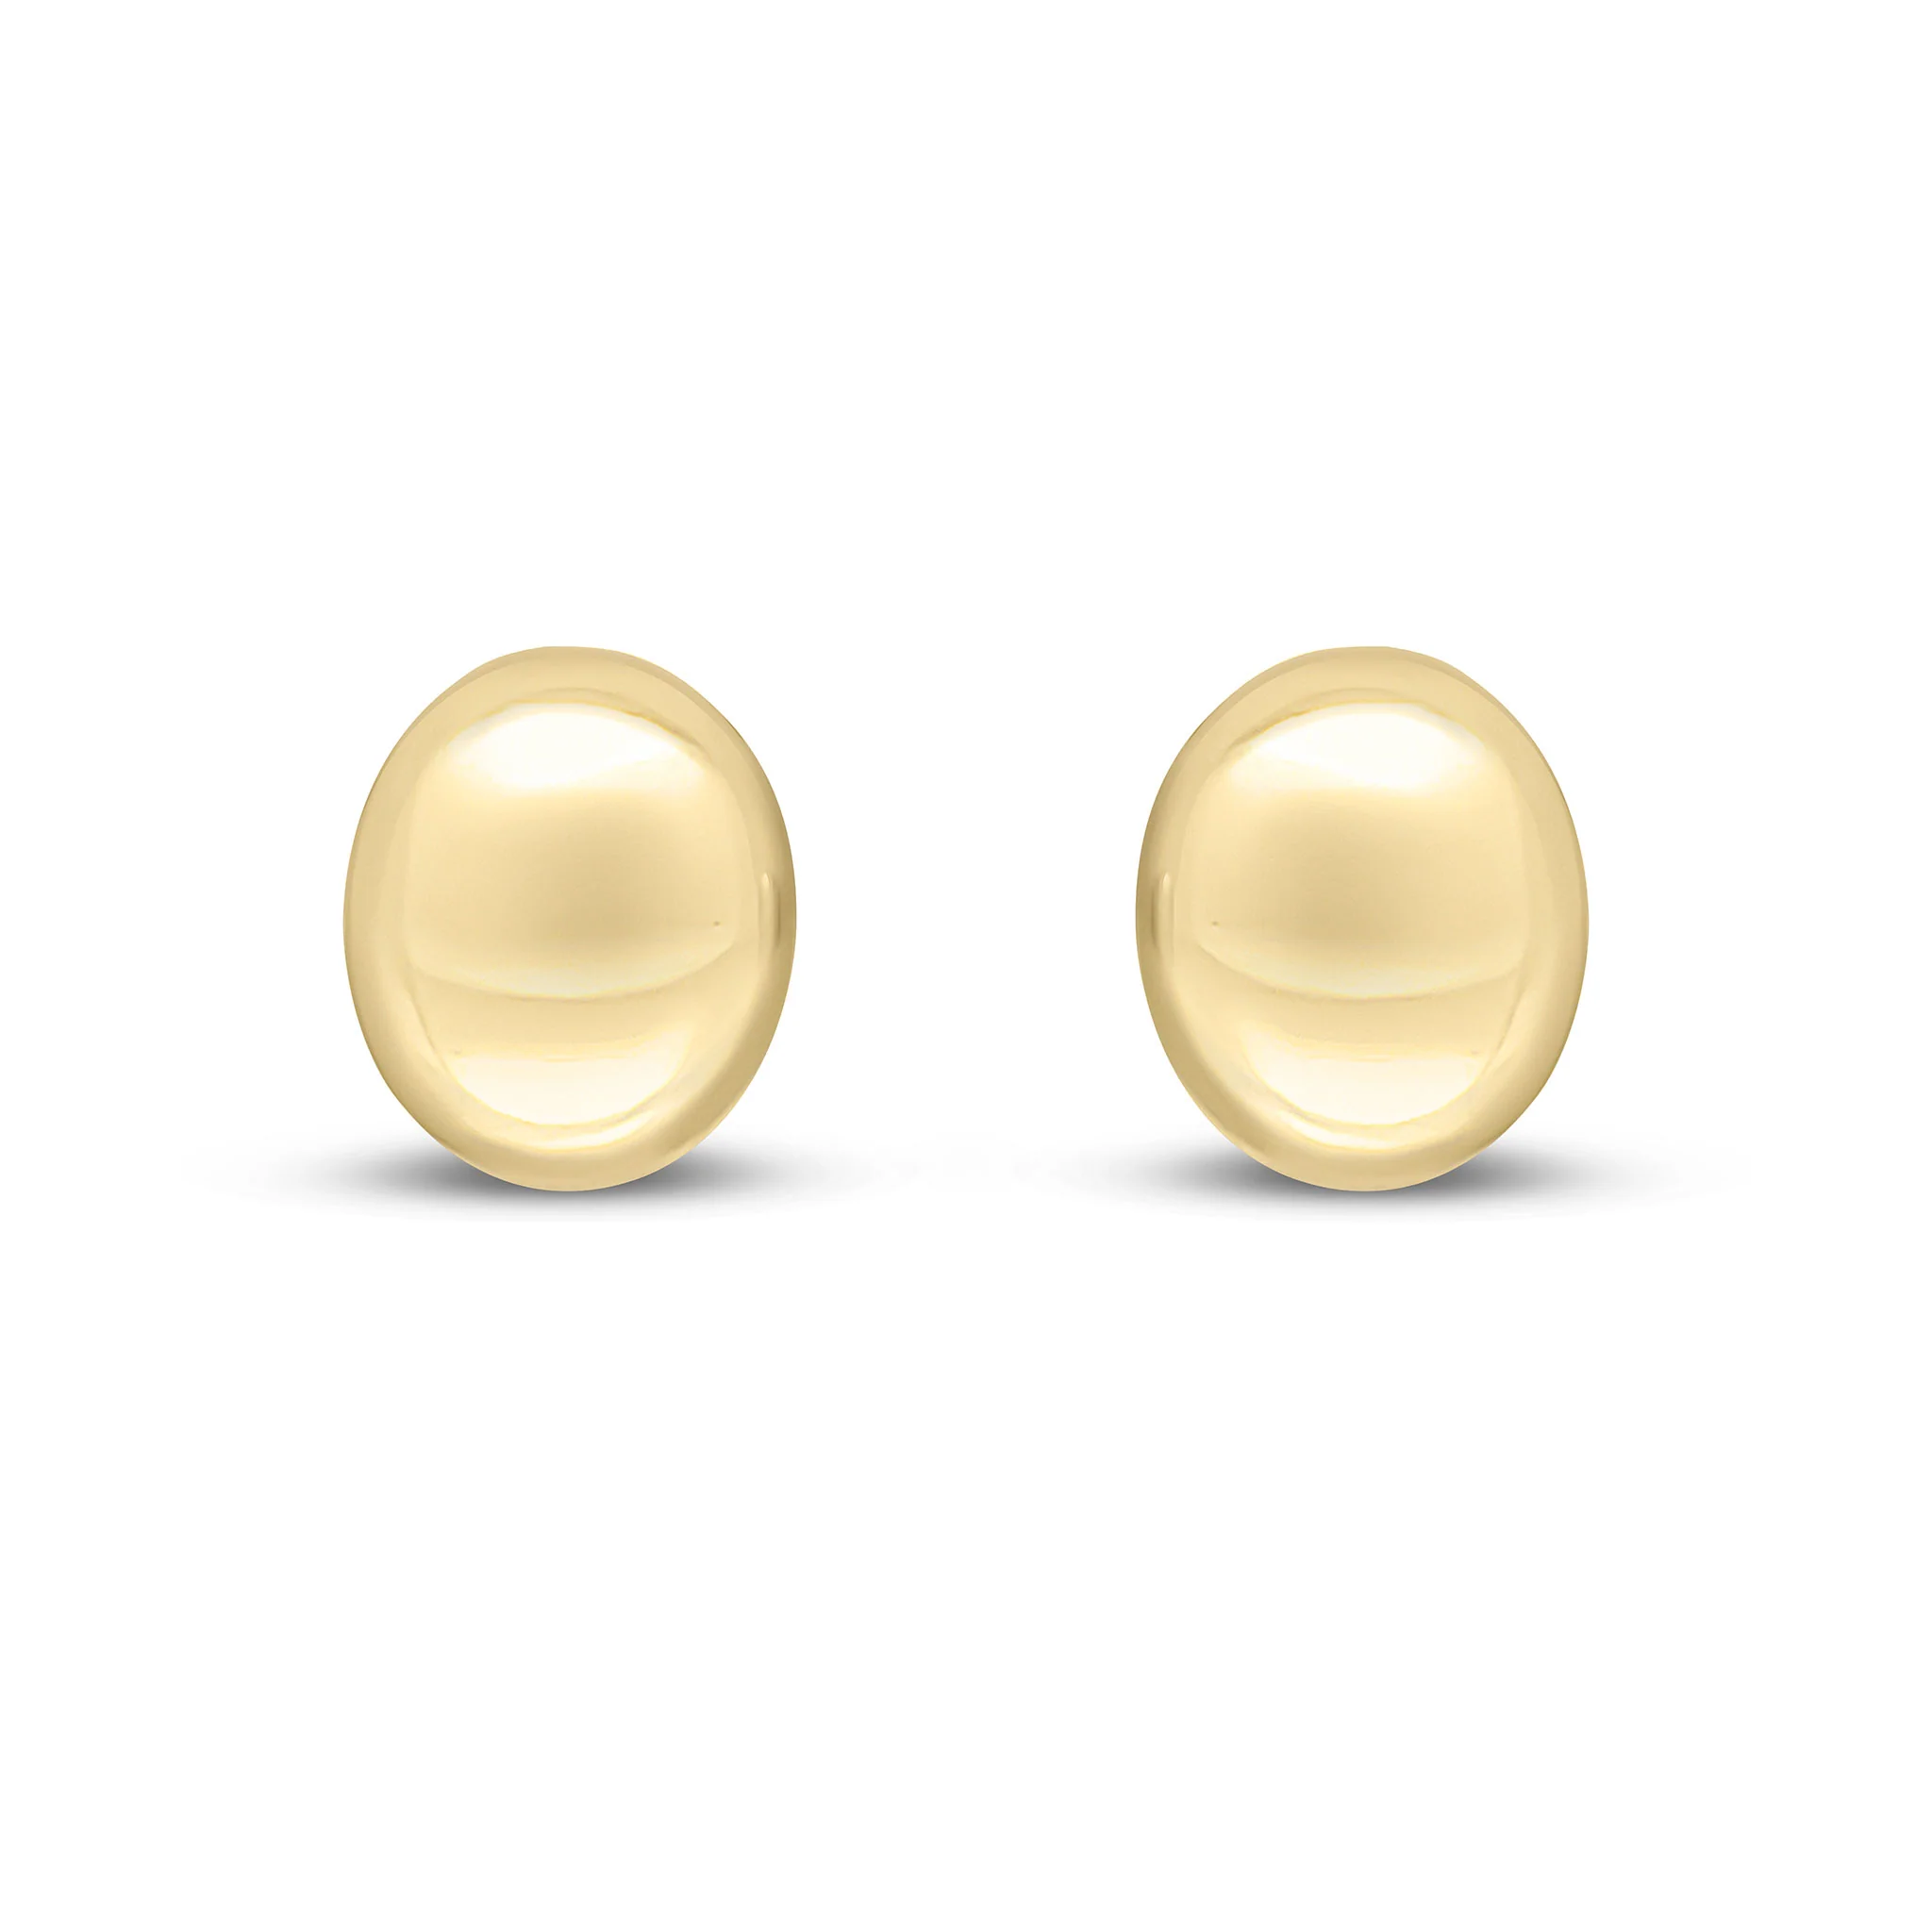 9CT Yellow Gold Oval Dome Polished Stud Earrings (10x8mm) - Robert Anthony Jewellers, Edinburgh